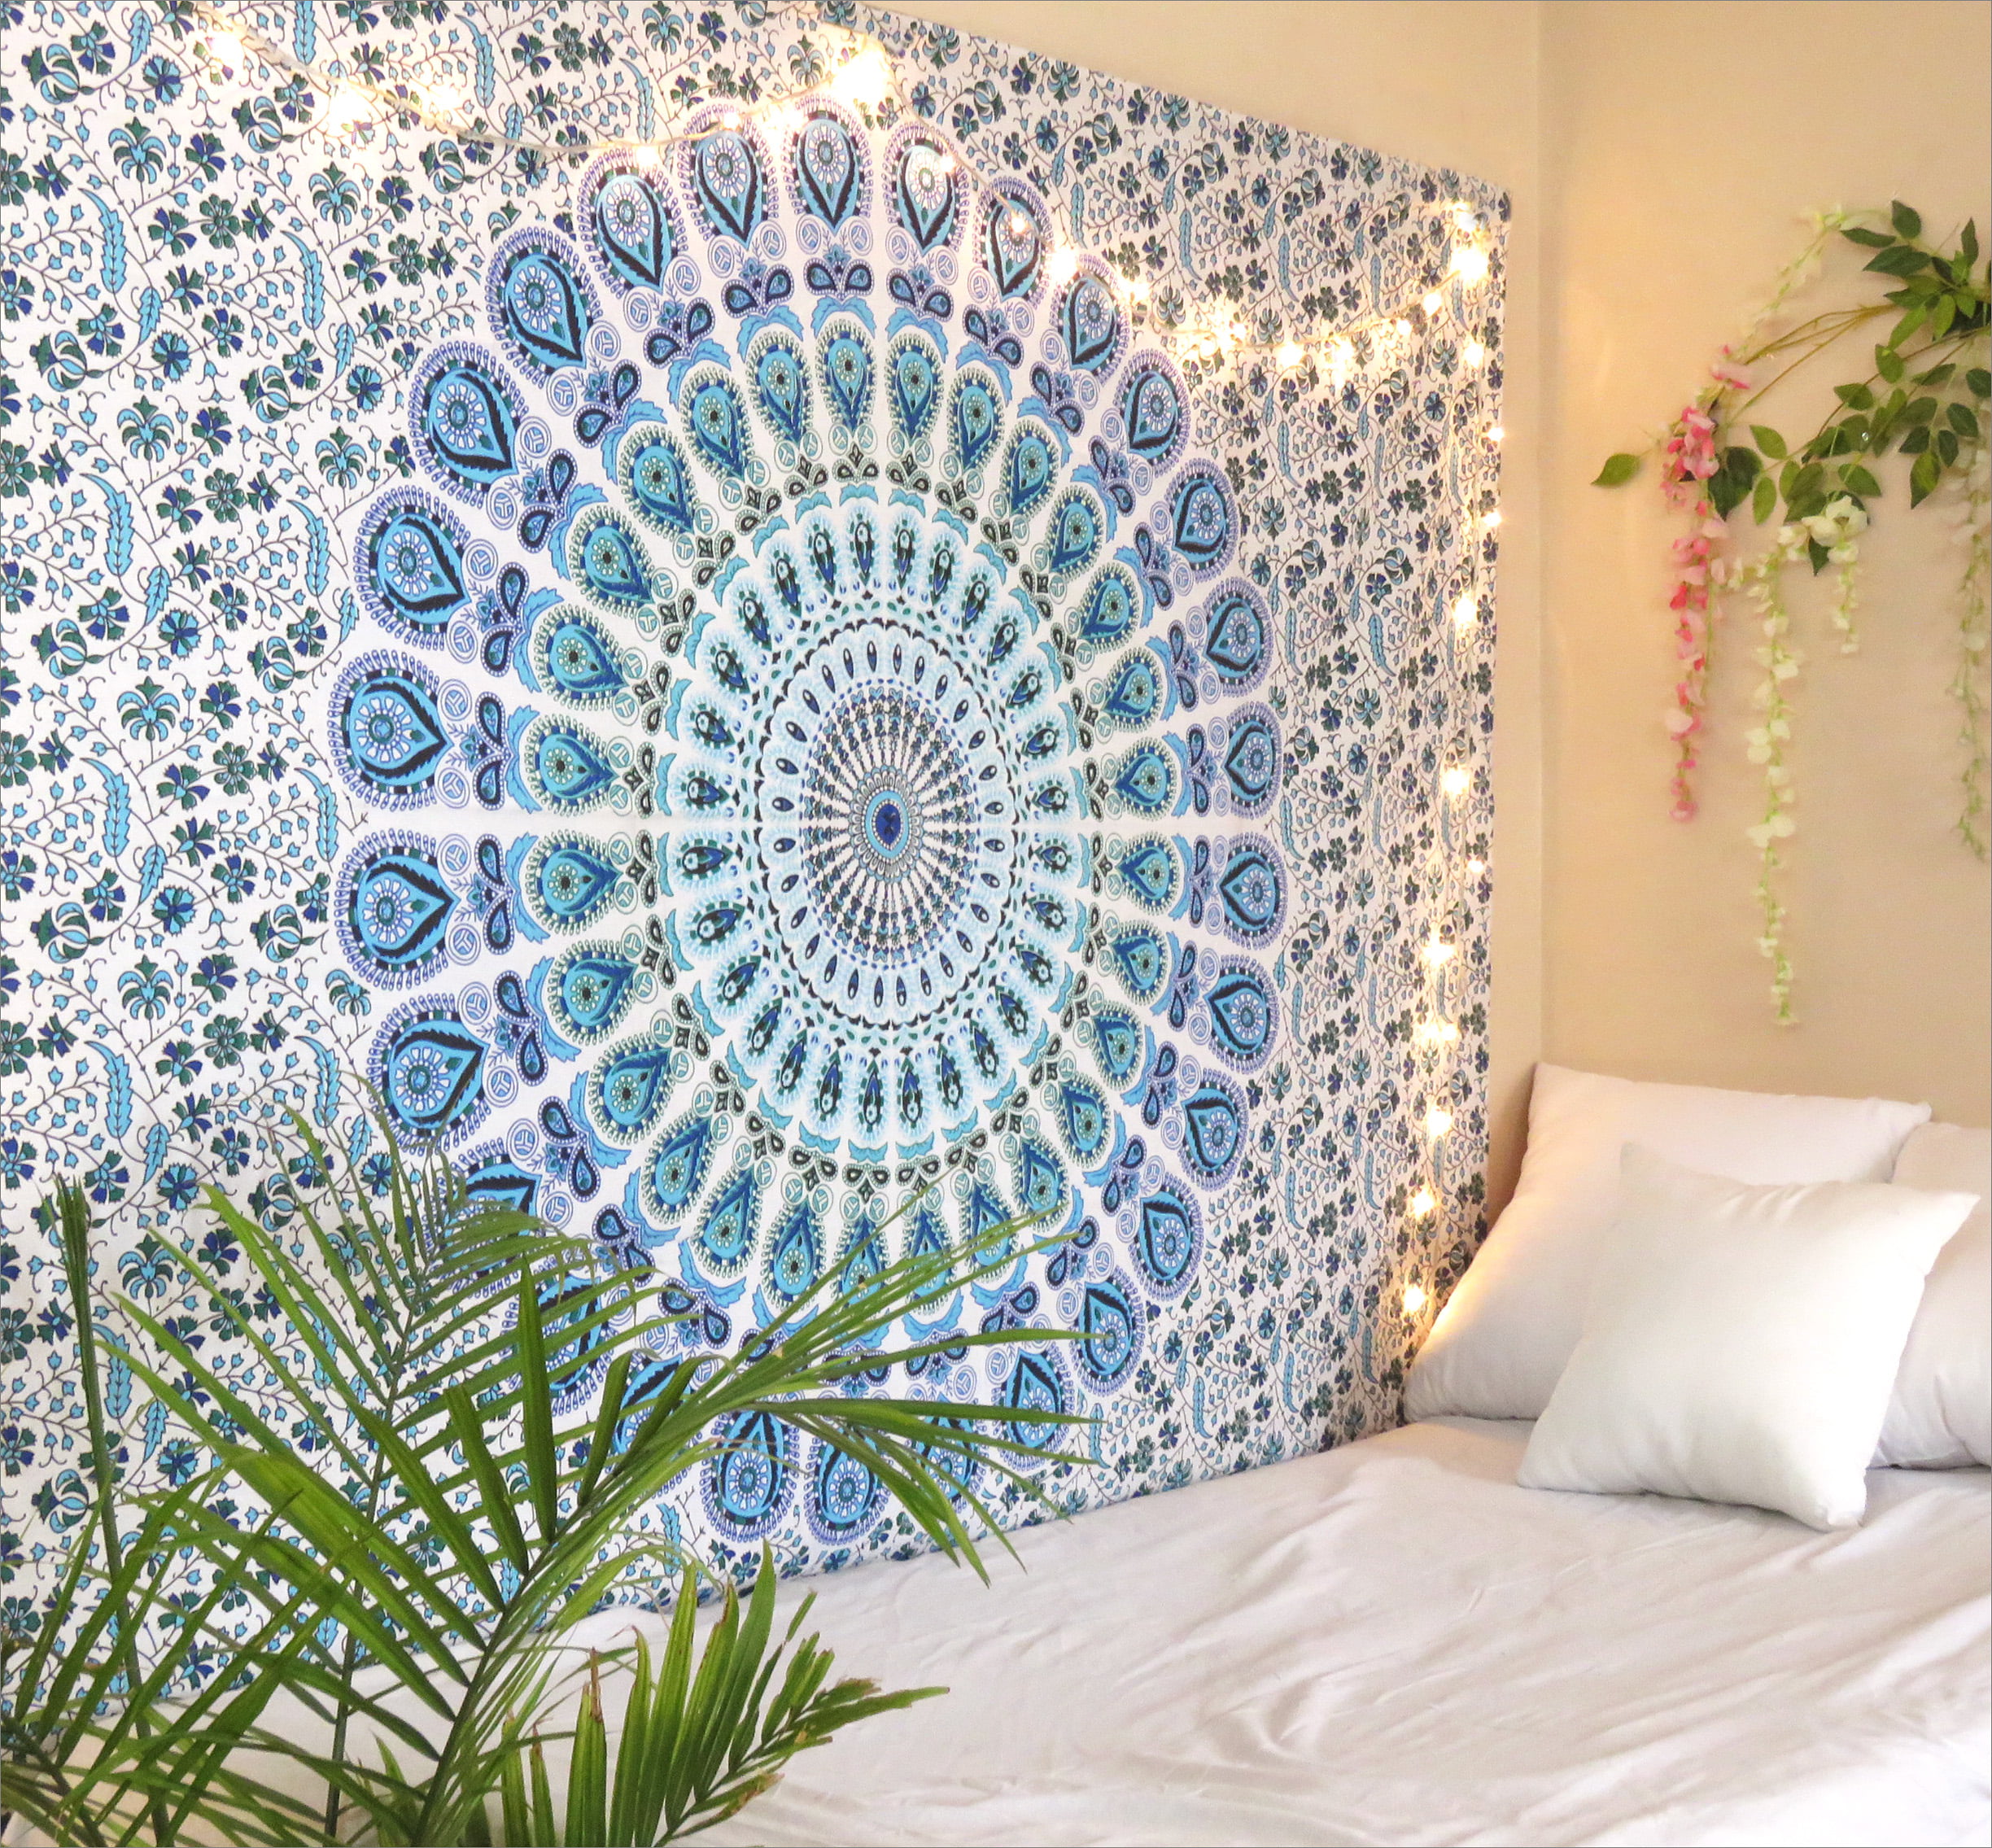 Ombre Mandala Tapestry Indian Wall Hanging Bohemian Hippie Bedspread Throw-Decor 